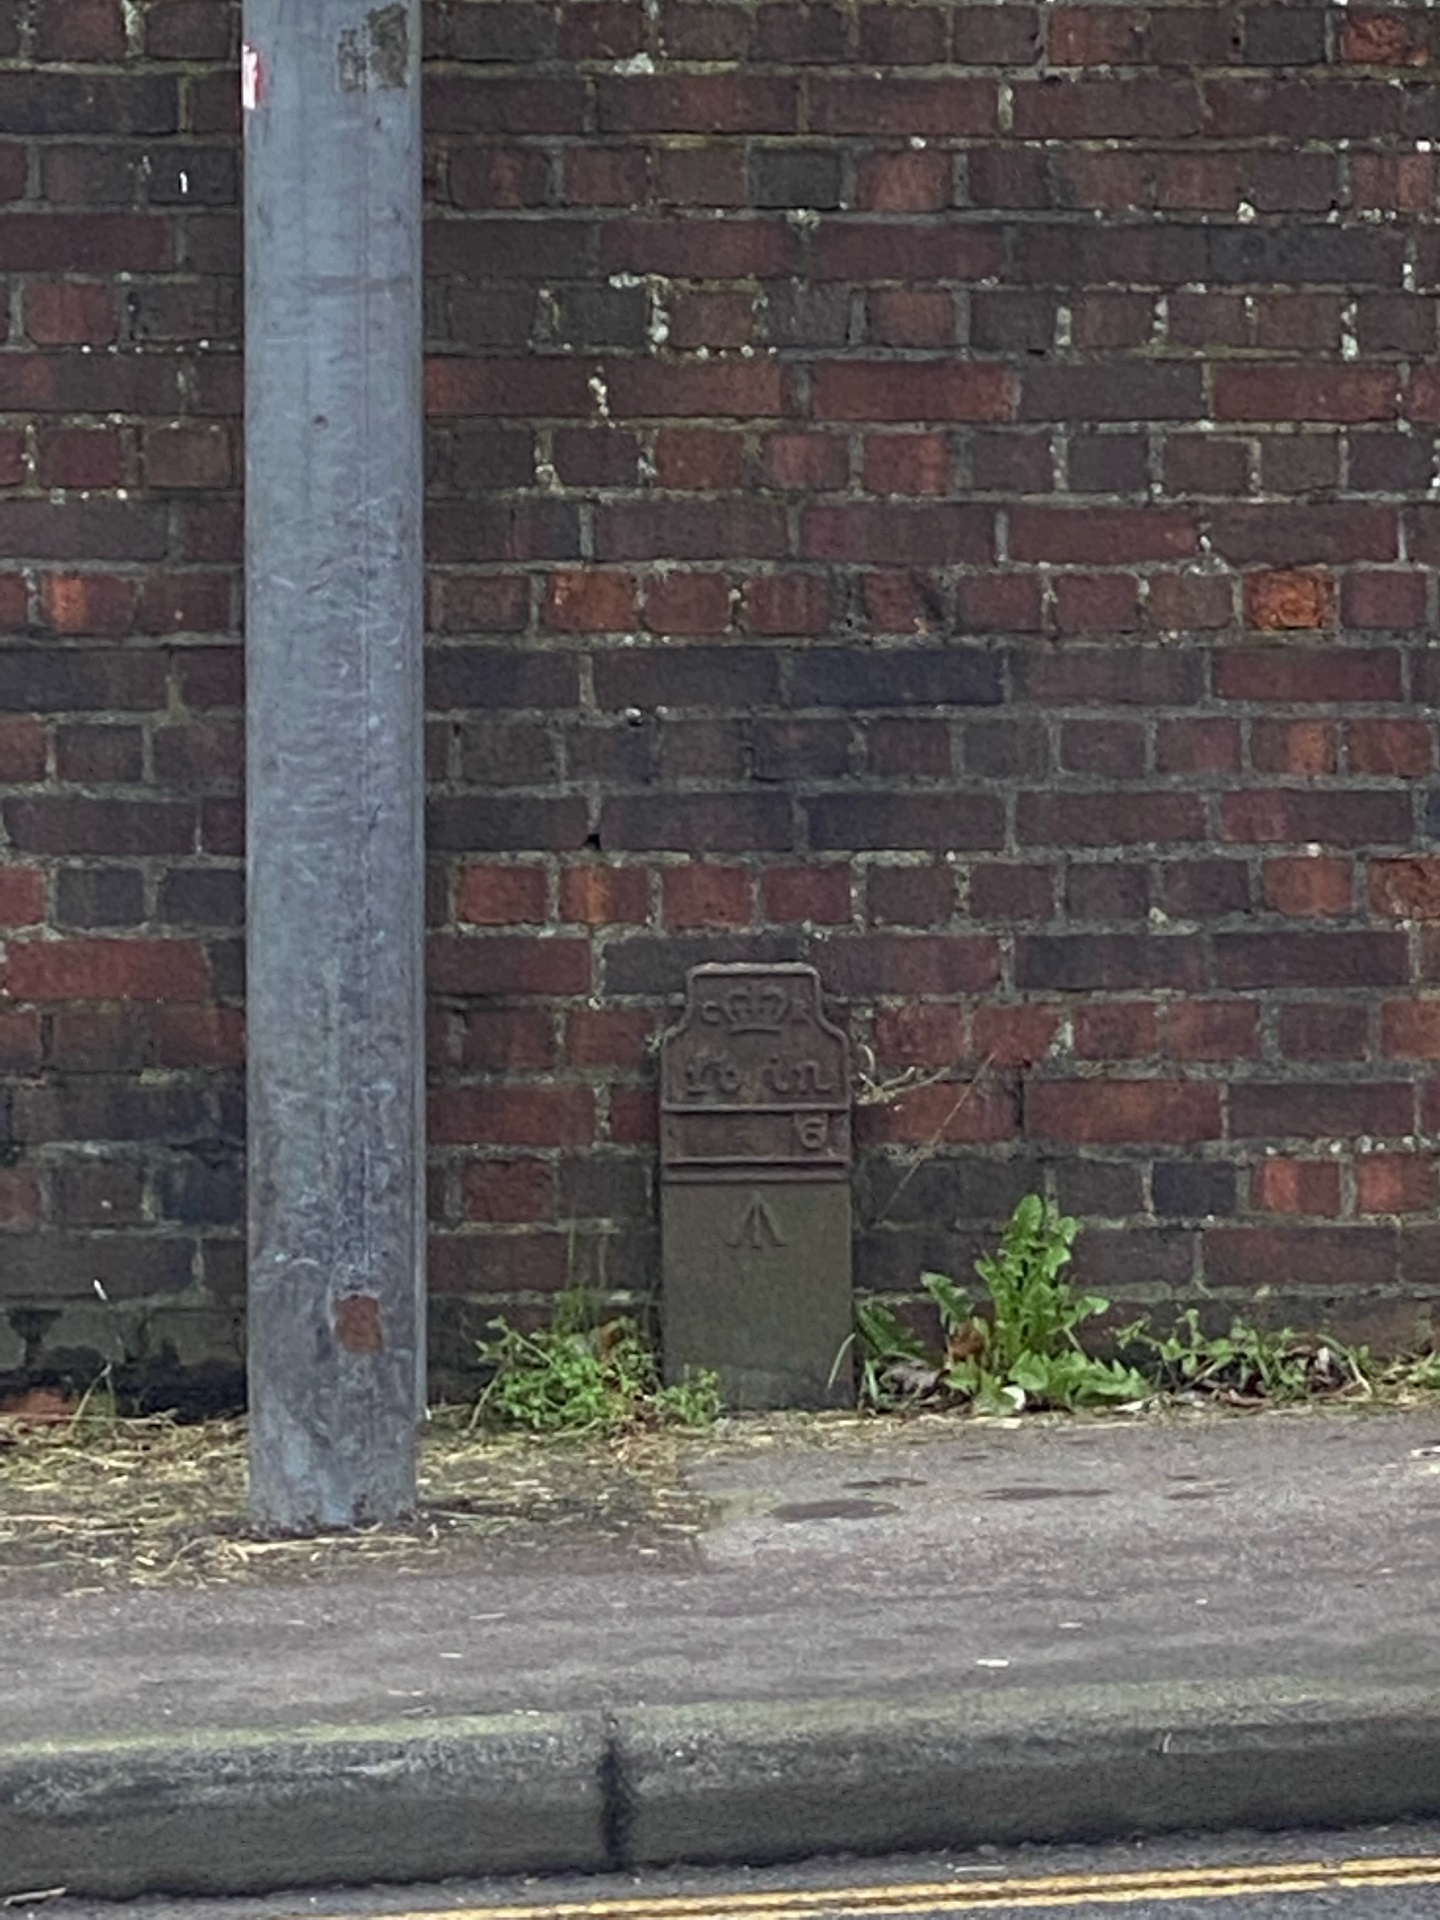 Telegraph cable marker post at Fisherton Street (South side), Salisbury by Ben Ford 